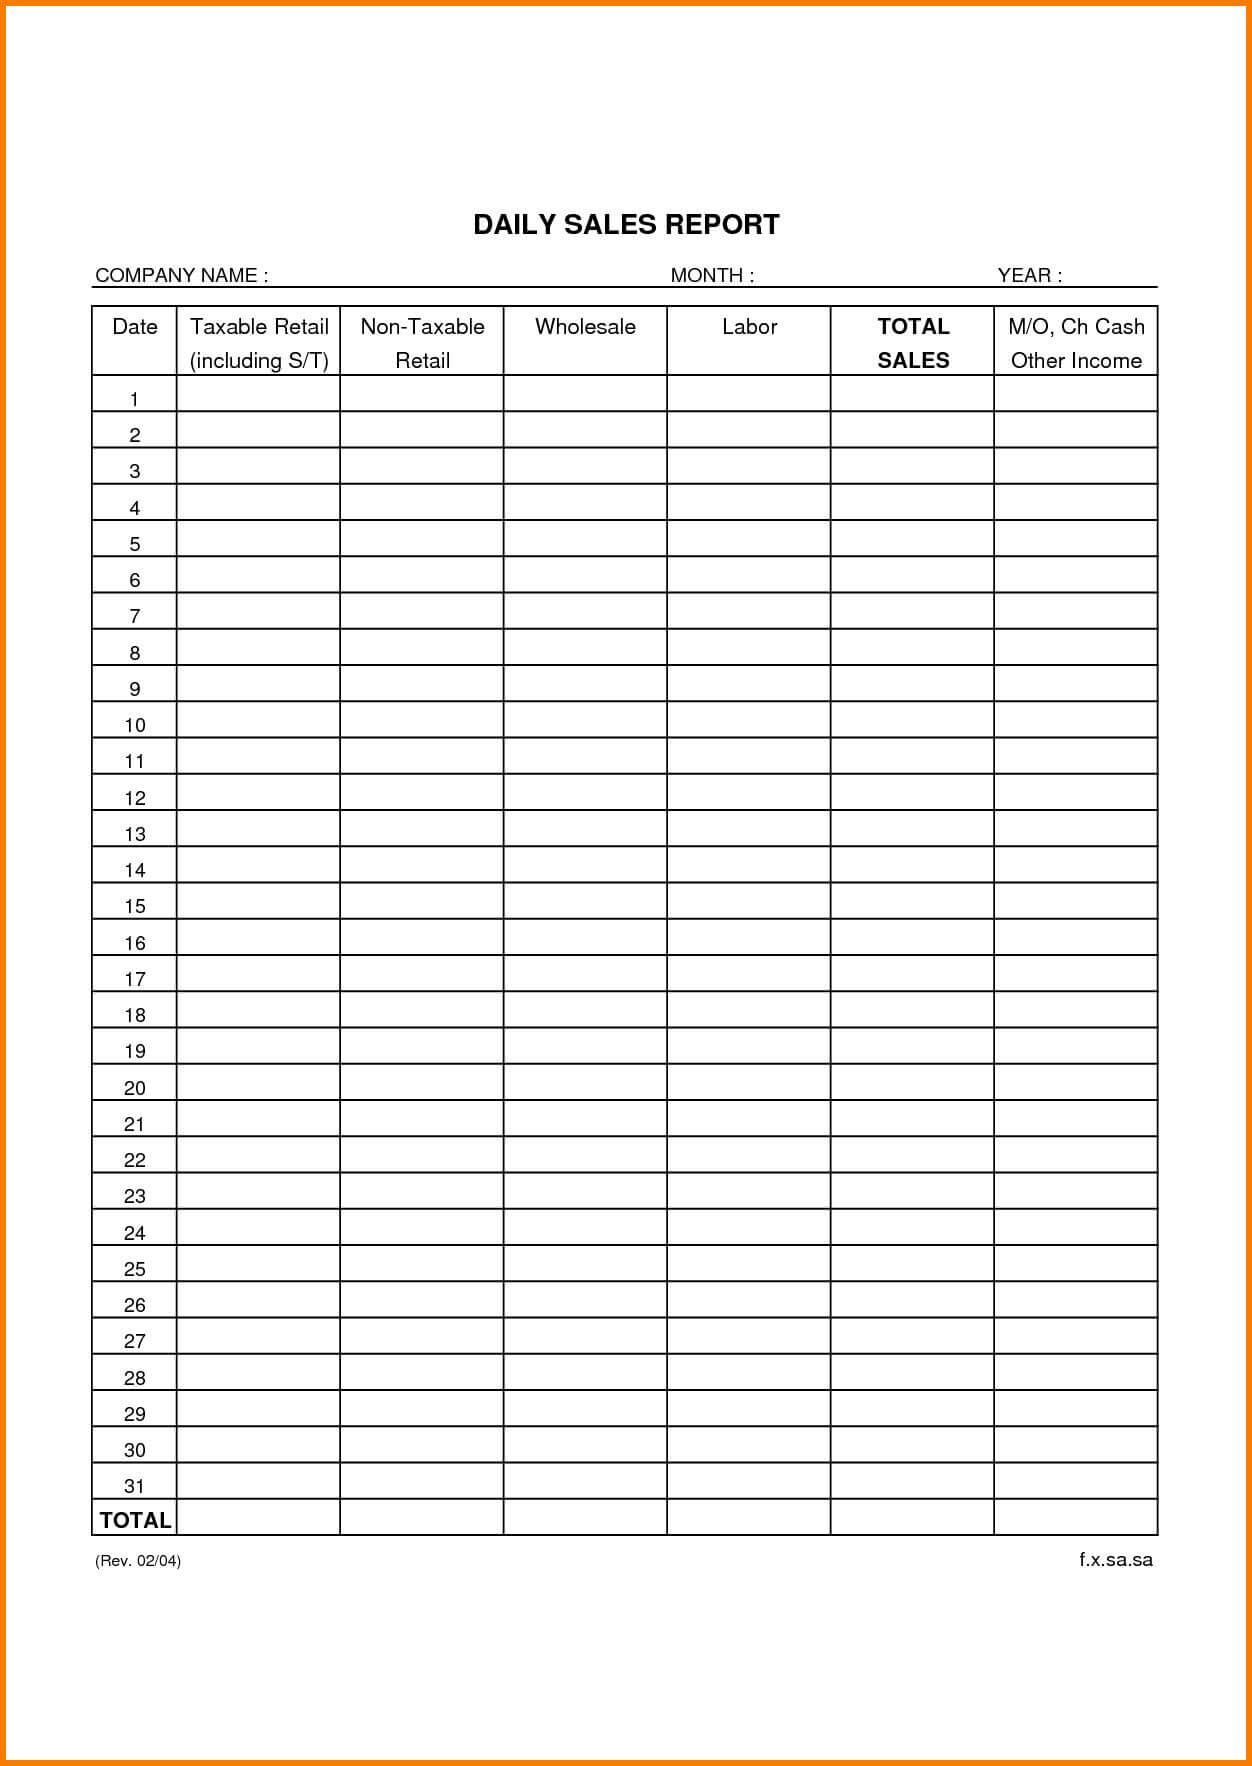 044 Sales Call Reporting Template Ideas Free Daily Report In In Free Daily Sales Report Excel Template